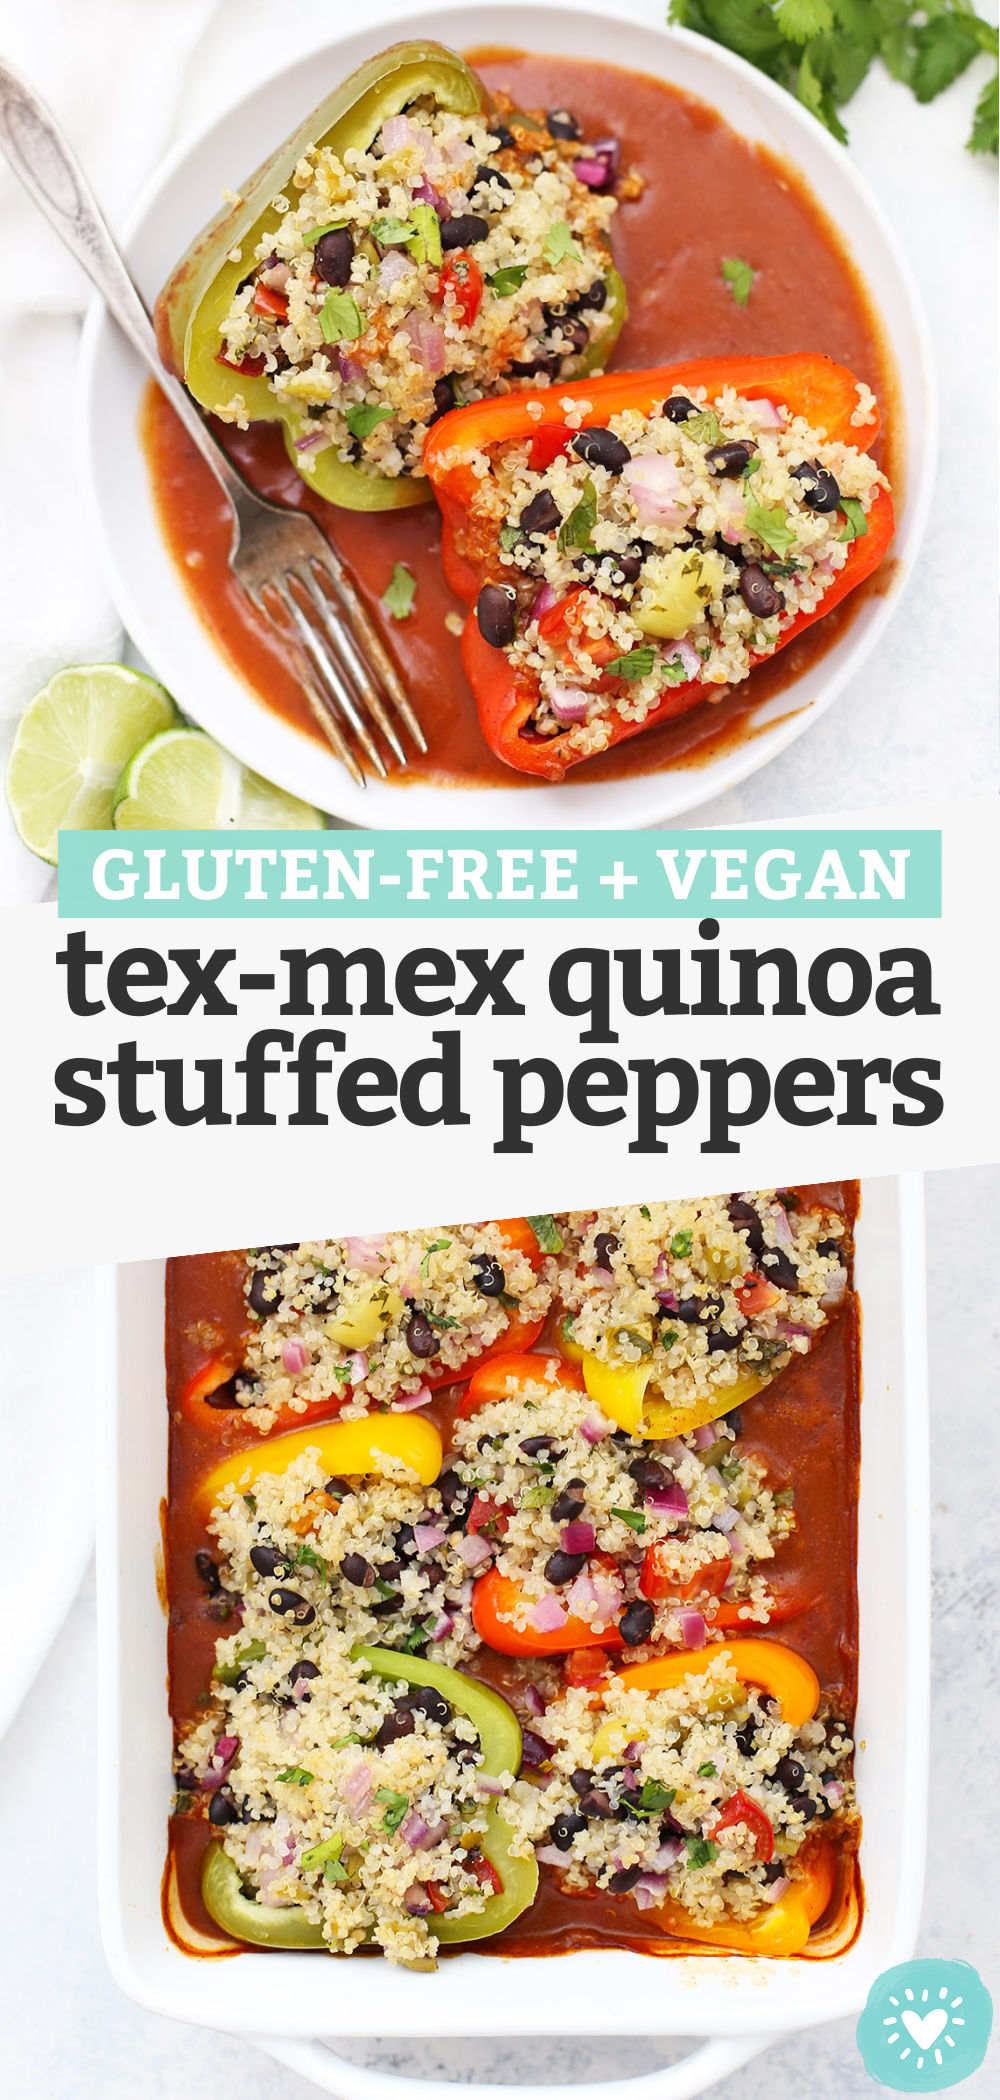 Mexican Stuffed Peppers with Quinoa and Black Beans - This gluten free, vegan dinner is SO GREAT for meal prep! (Don't skip the easy homemade enchilada sauce!) // Tex Mex Quinoa Stuffed Peppers // Vegan Stuffed Peppers #stuffedpeppers #vegandinner #healthydinner #vegan #glutenfree